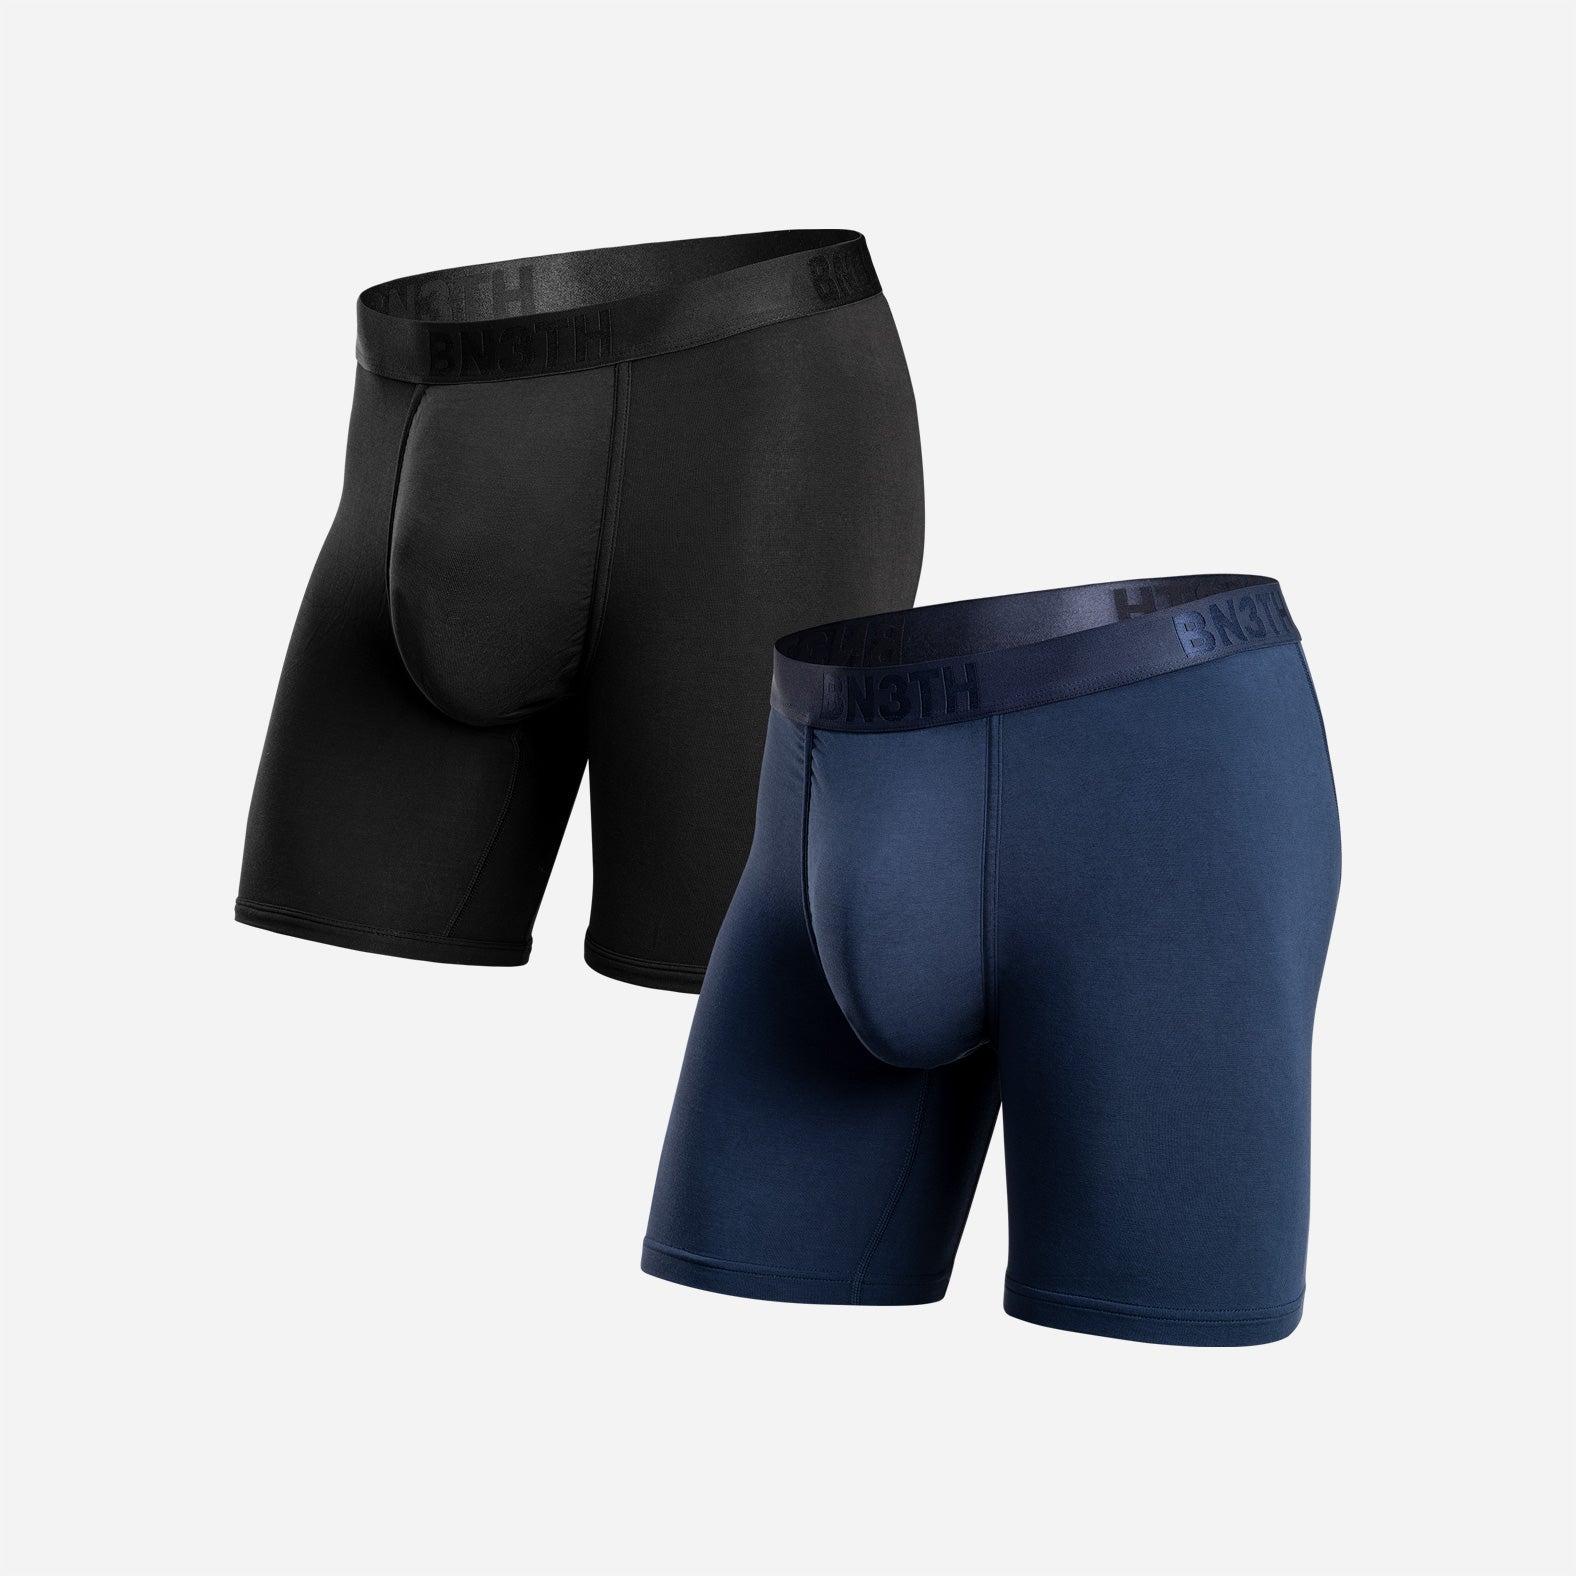 Outset Boxer Brief: Naval Academy